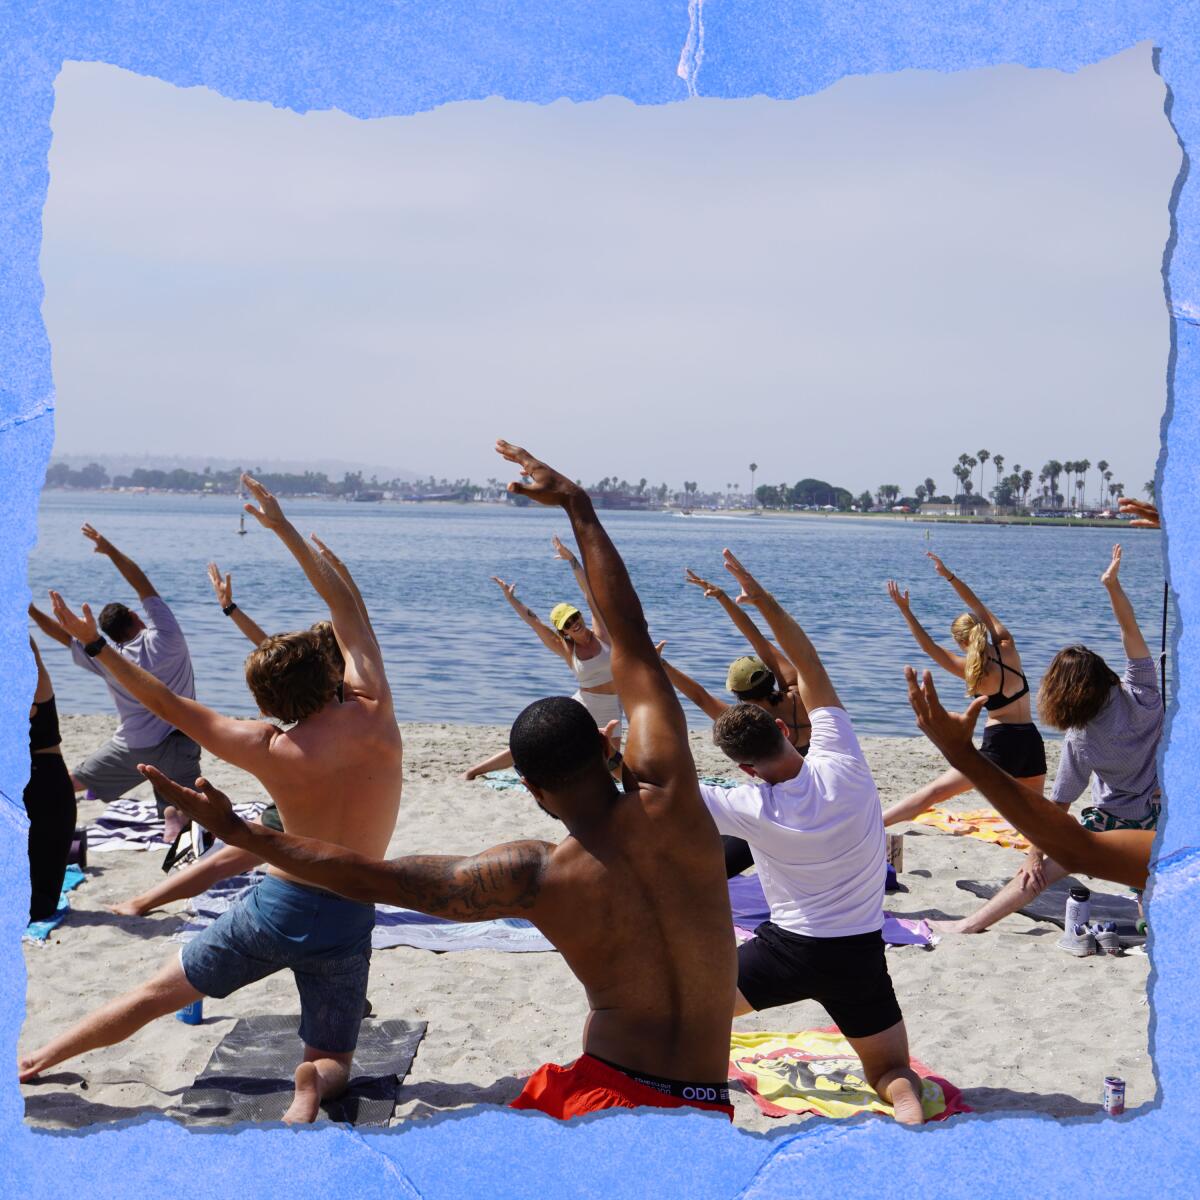 Find new fitness friends in active communities, from hiking to yoga to beach tennis, across LA.